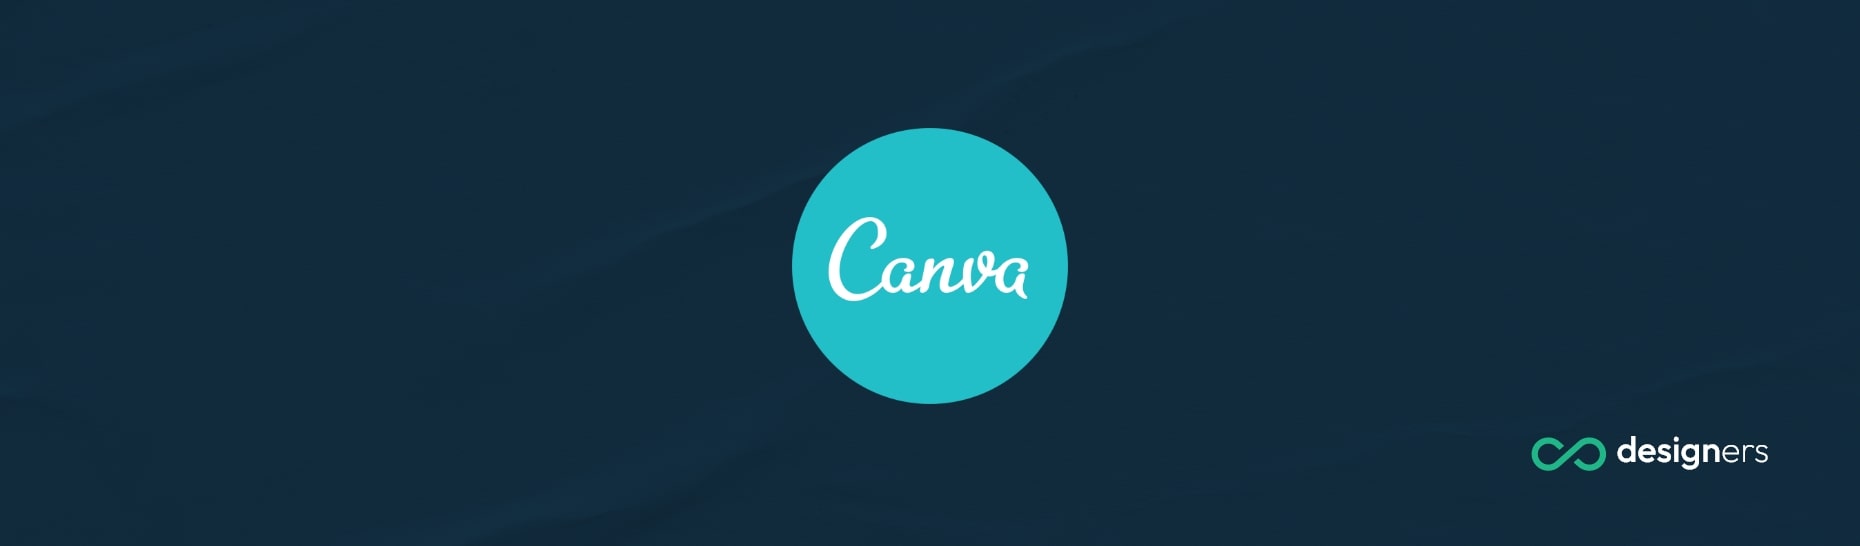 Is Canva a Photo Editor?